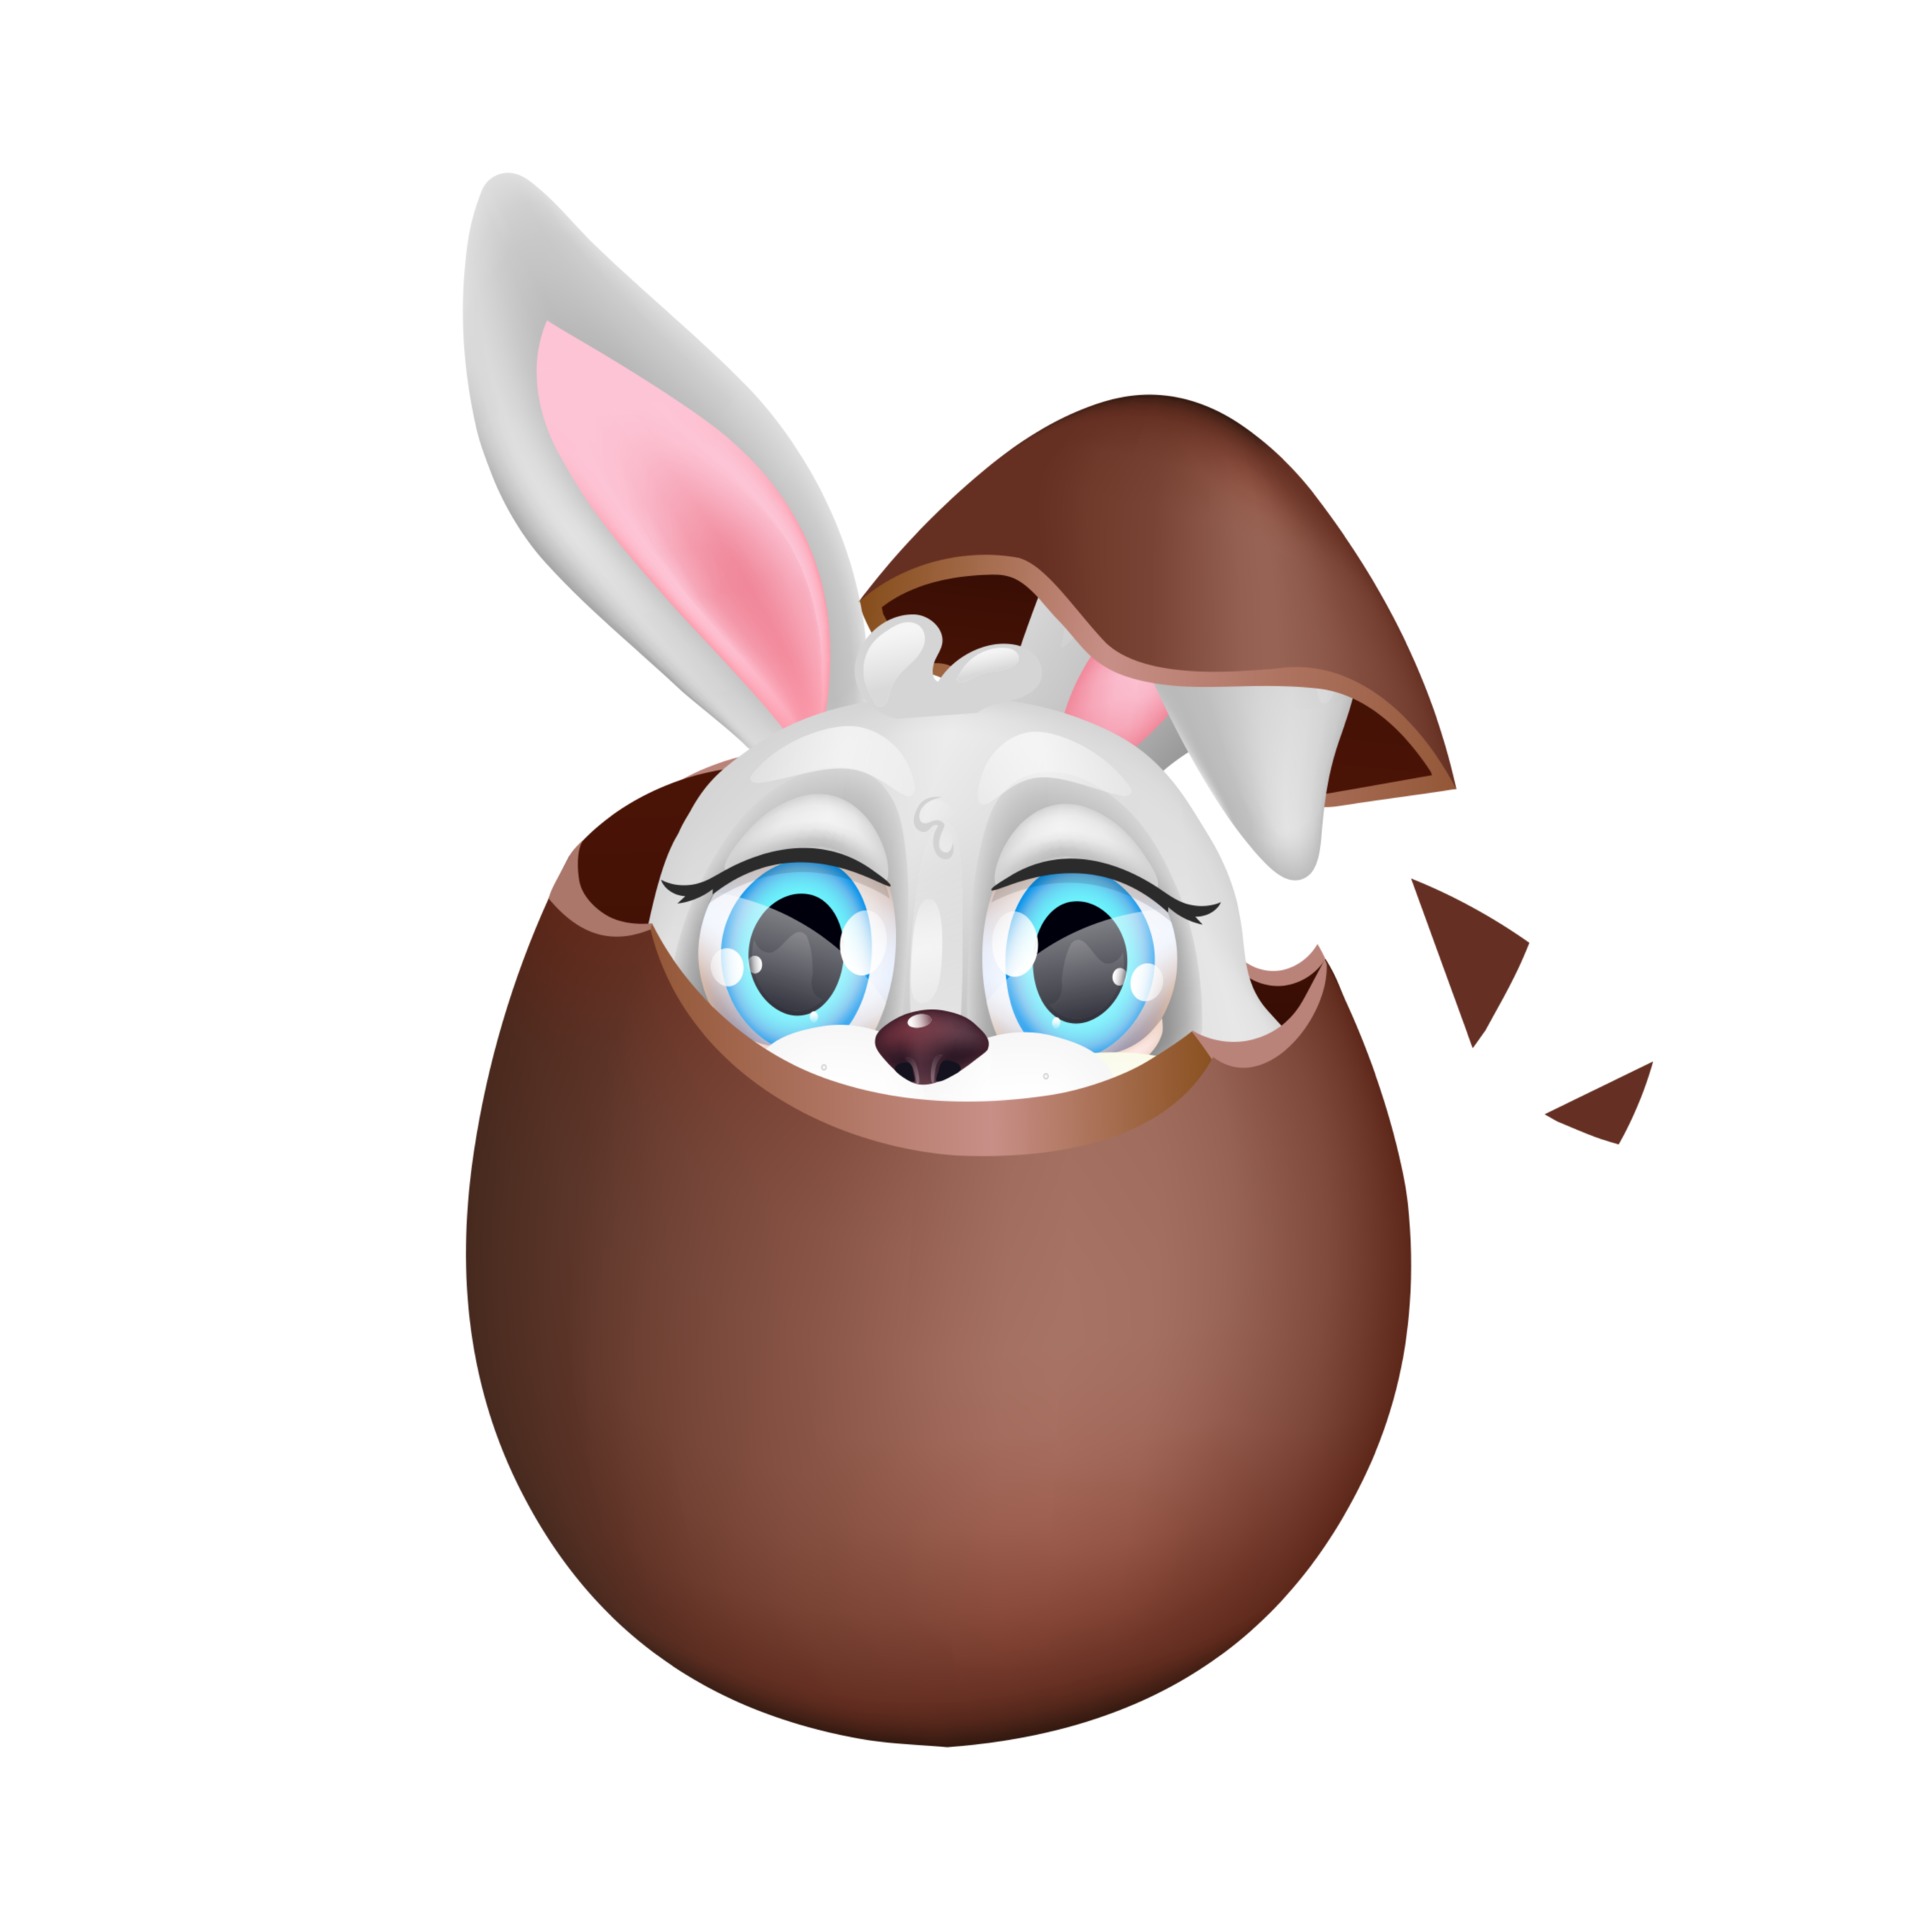 cute-bunny-sitting-in-chocolate-egg-kawaii-cartoon-character-easter-holiday-symbol-adorable-and-funny-animal-peer-out-sweet-egg-isolated-sticker-patch-anime-baby-rabbit-tricky-hare-emoji-on-white-vector.jpg